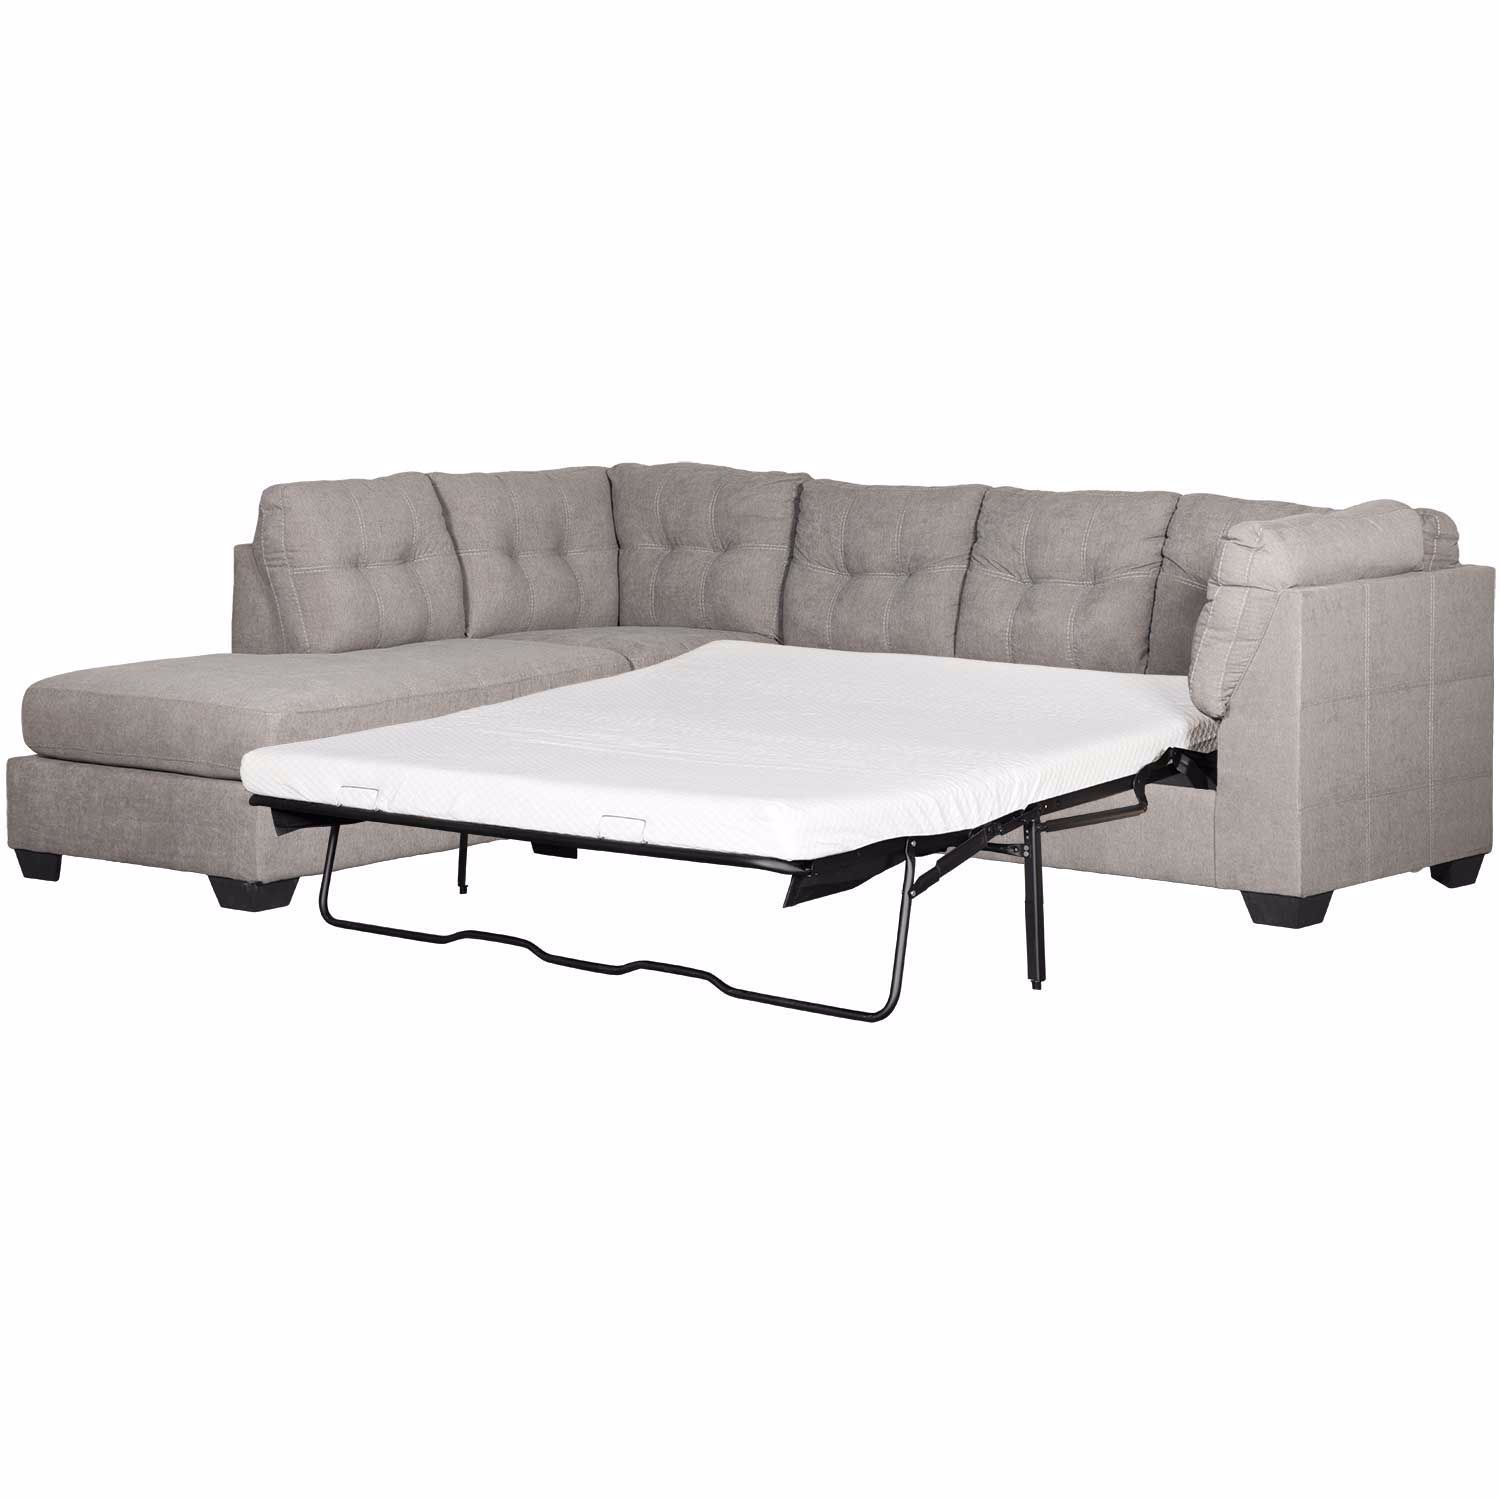 Maier Charcoal 2 Piece Sleeper Sectional With Laf Chaise For Aspen 2 Piece Sleeper Sectionals With Laf Chaise (View 9 of 15)